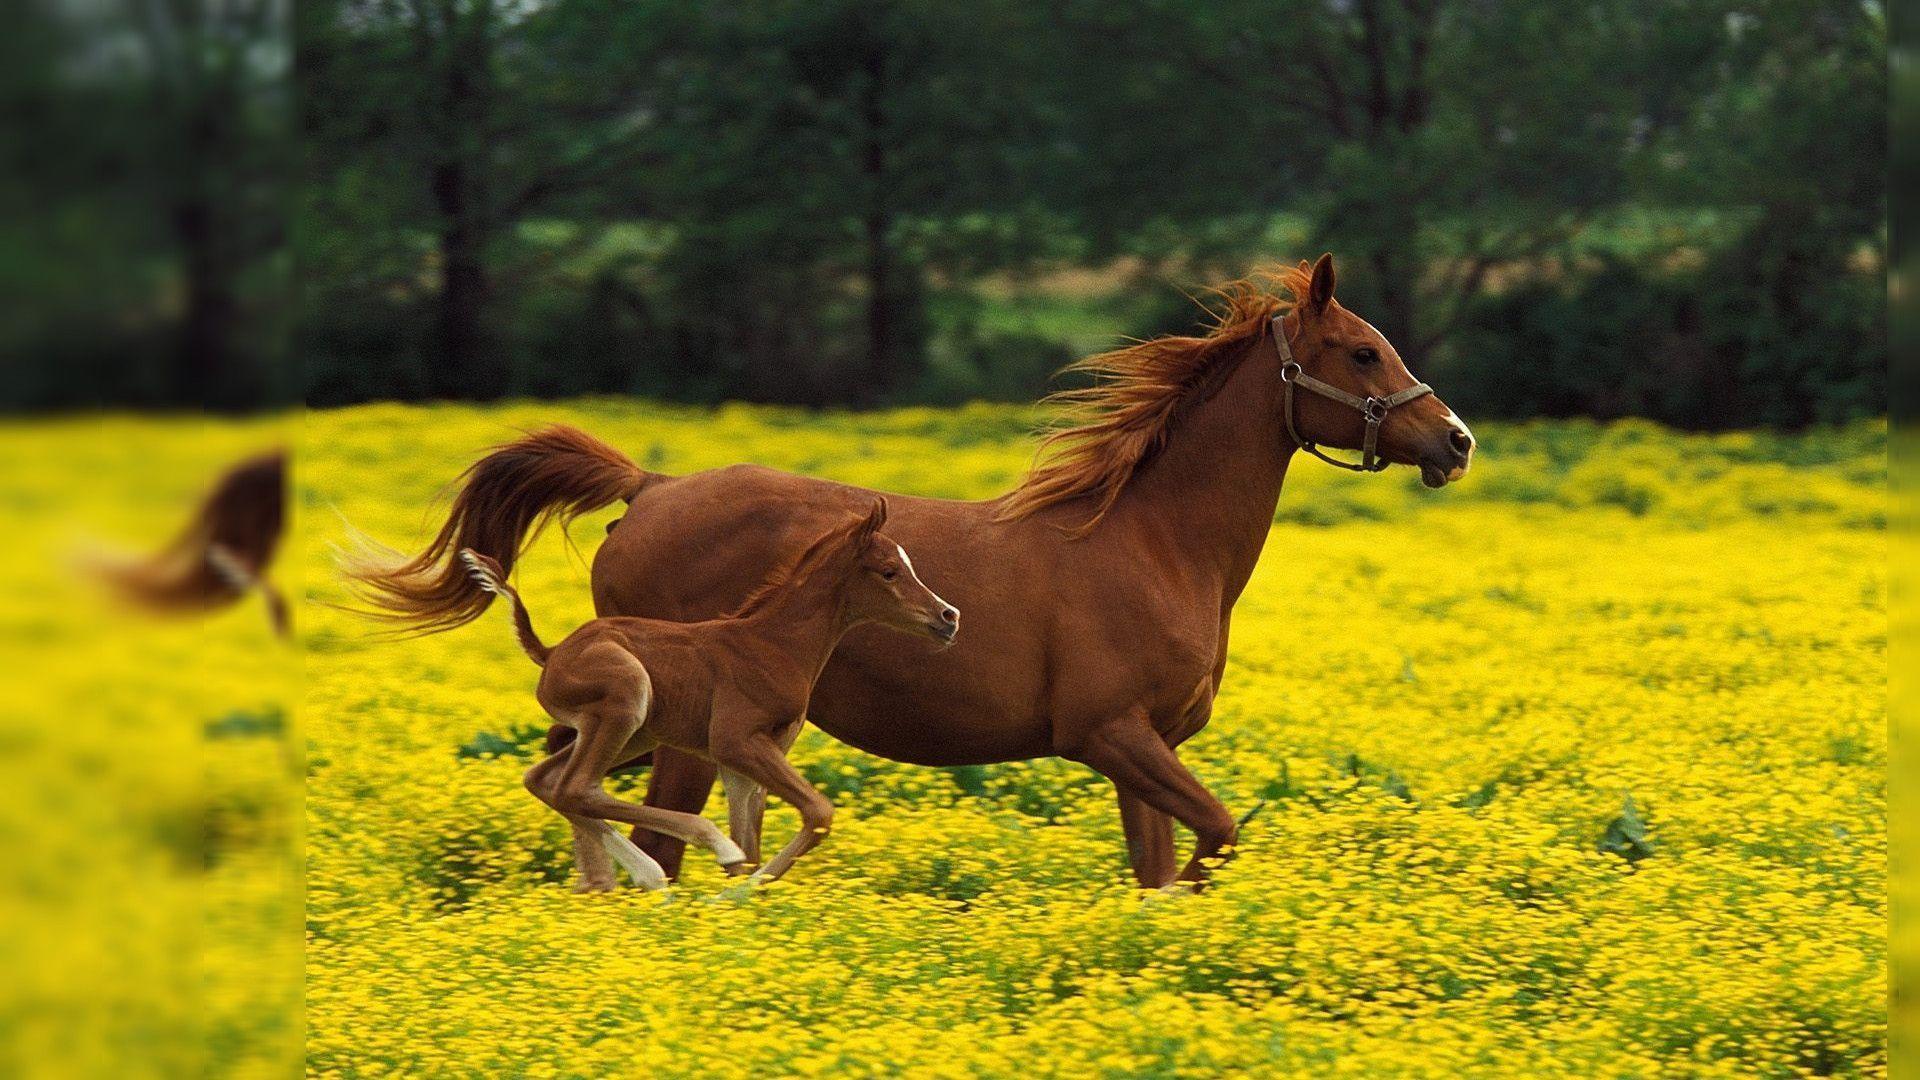 Baby Horse Background, wallpaper, Baby Horse Background HD